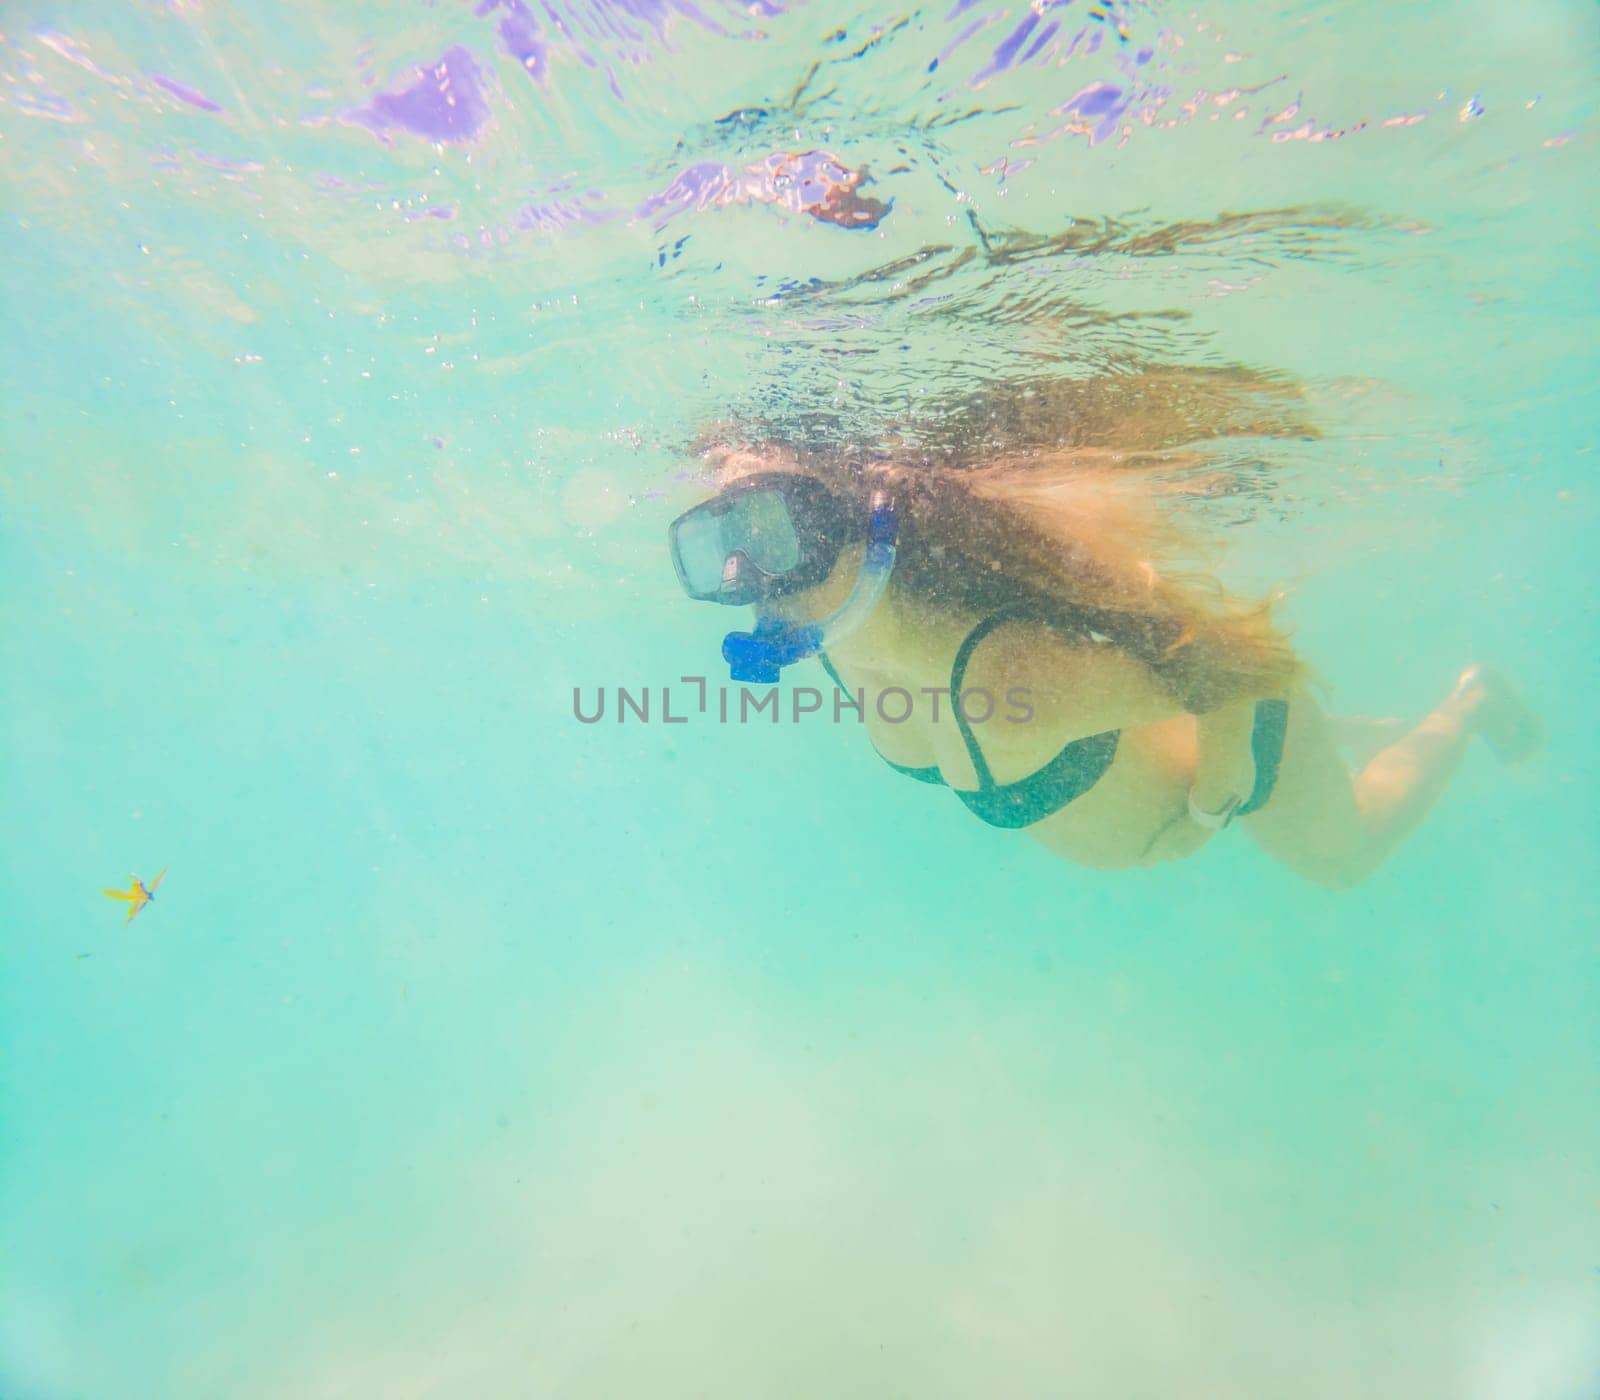 Pregnant woman underwater swimming in tropical sea. Healthy and active pregnancy. Young expecting mom on summer beach vacation before baby birth. Swim holiday and water fun. Travel during pregnancy. Underwater photography by galitskaya